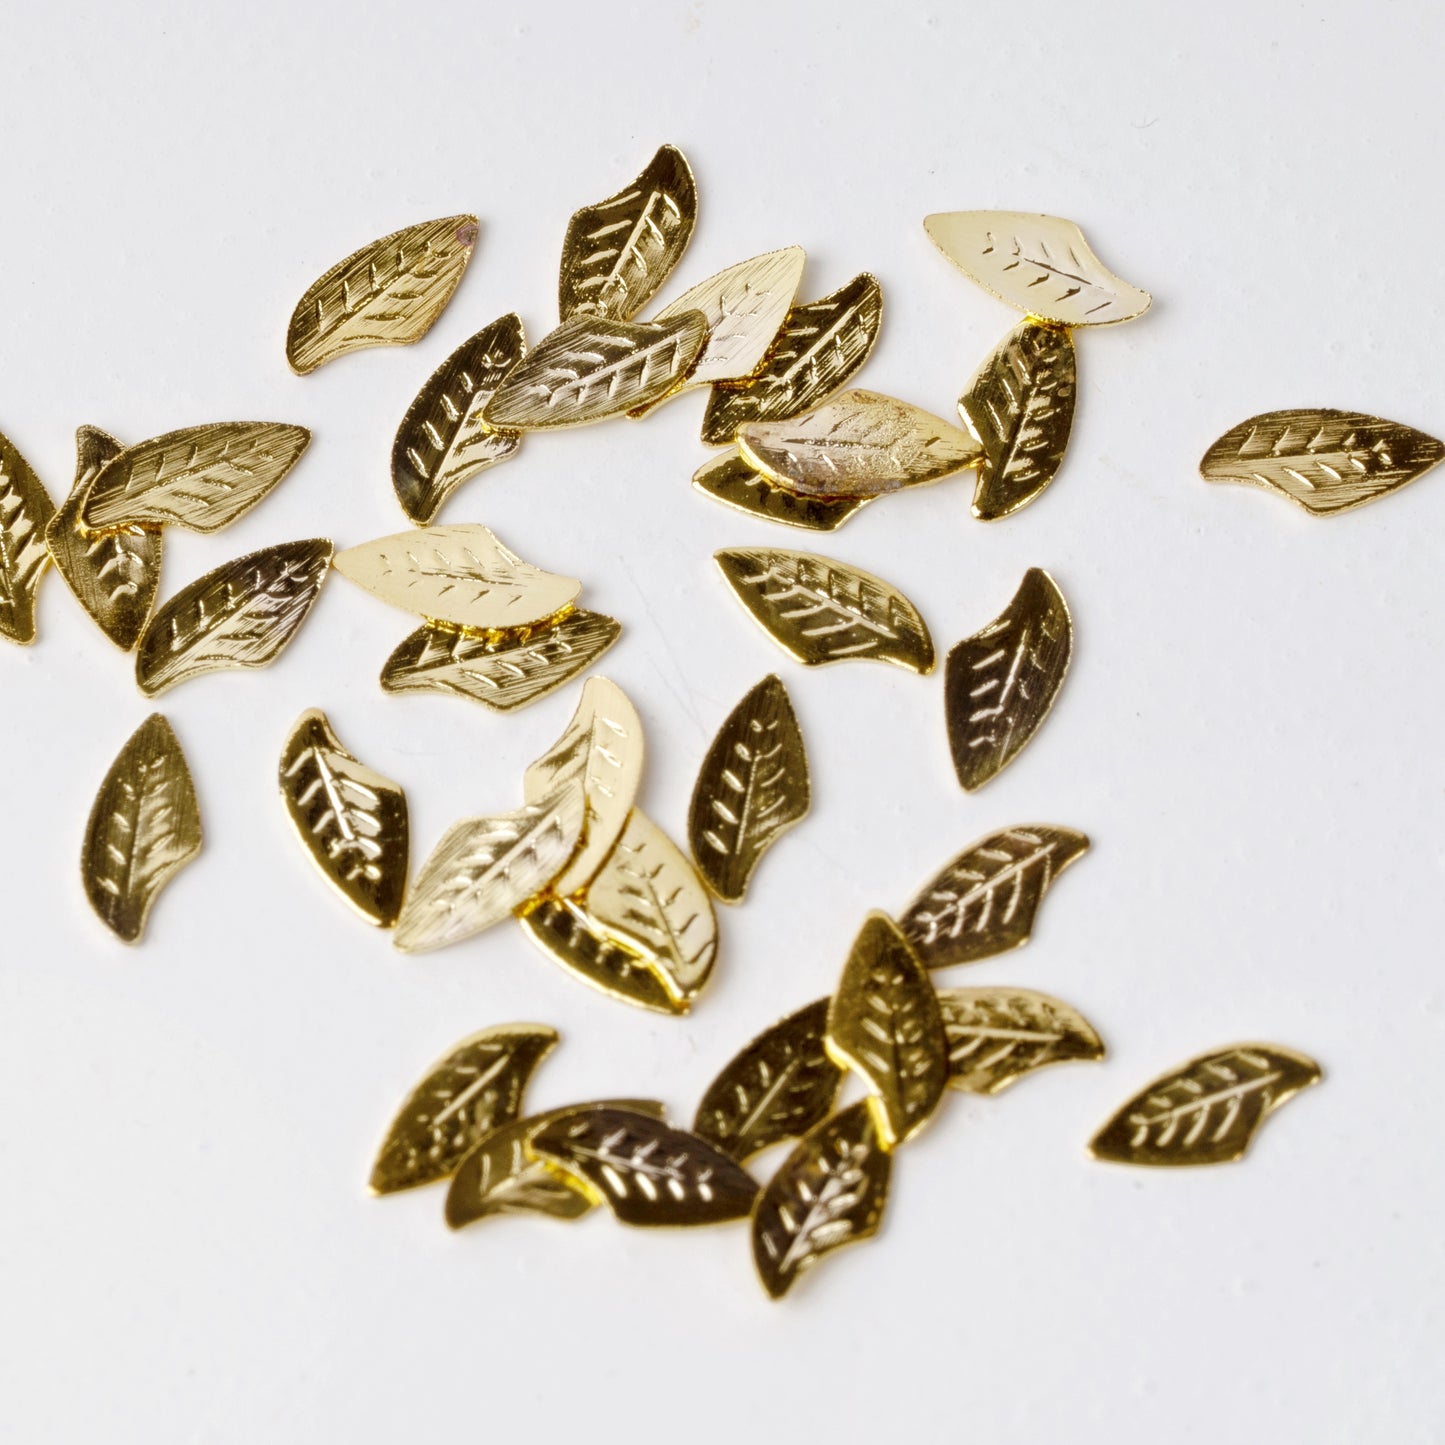 Gold leaf nail charms scattered on a white background.